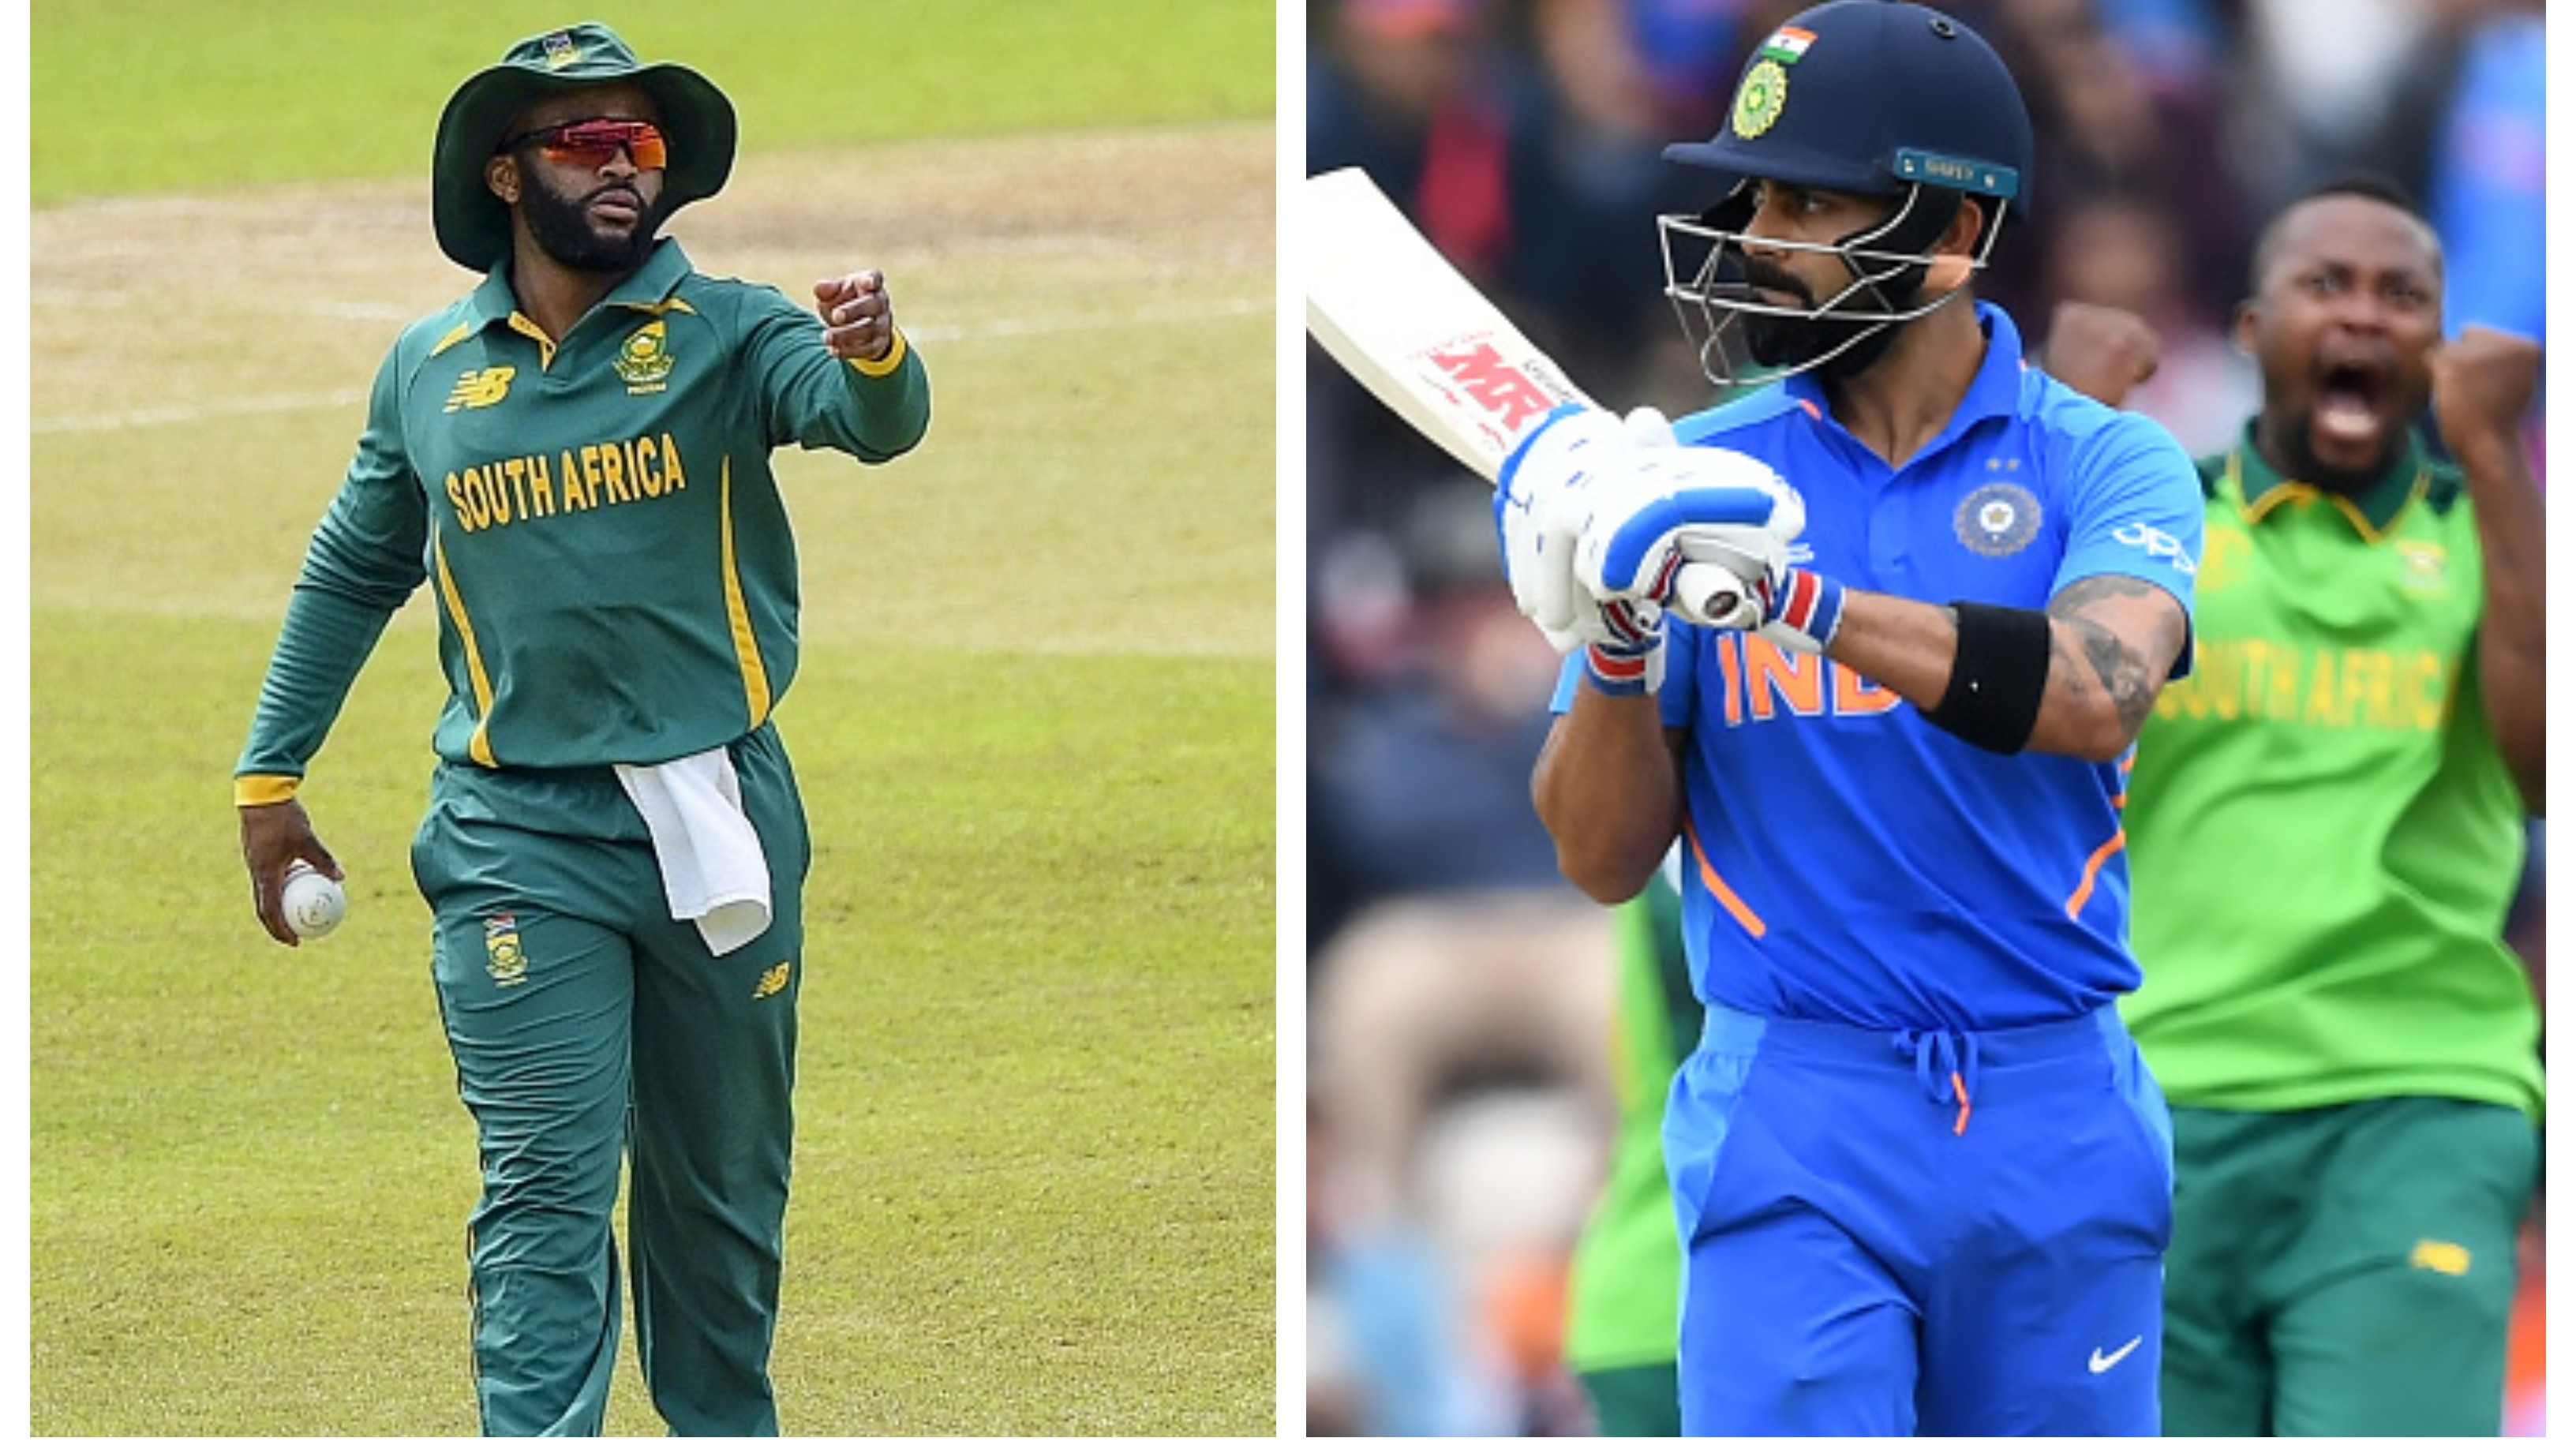 SA v IND 2021-22: ODI Series win versus India will give South Africa 